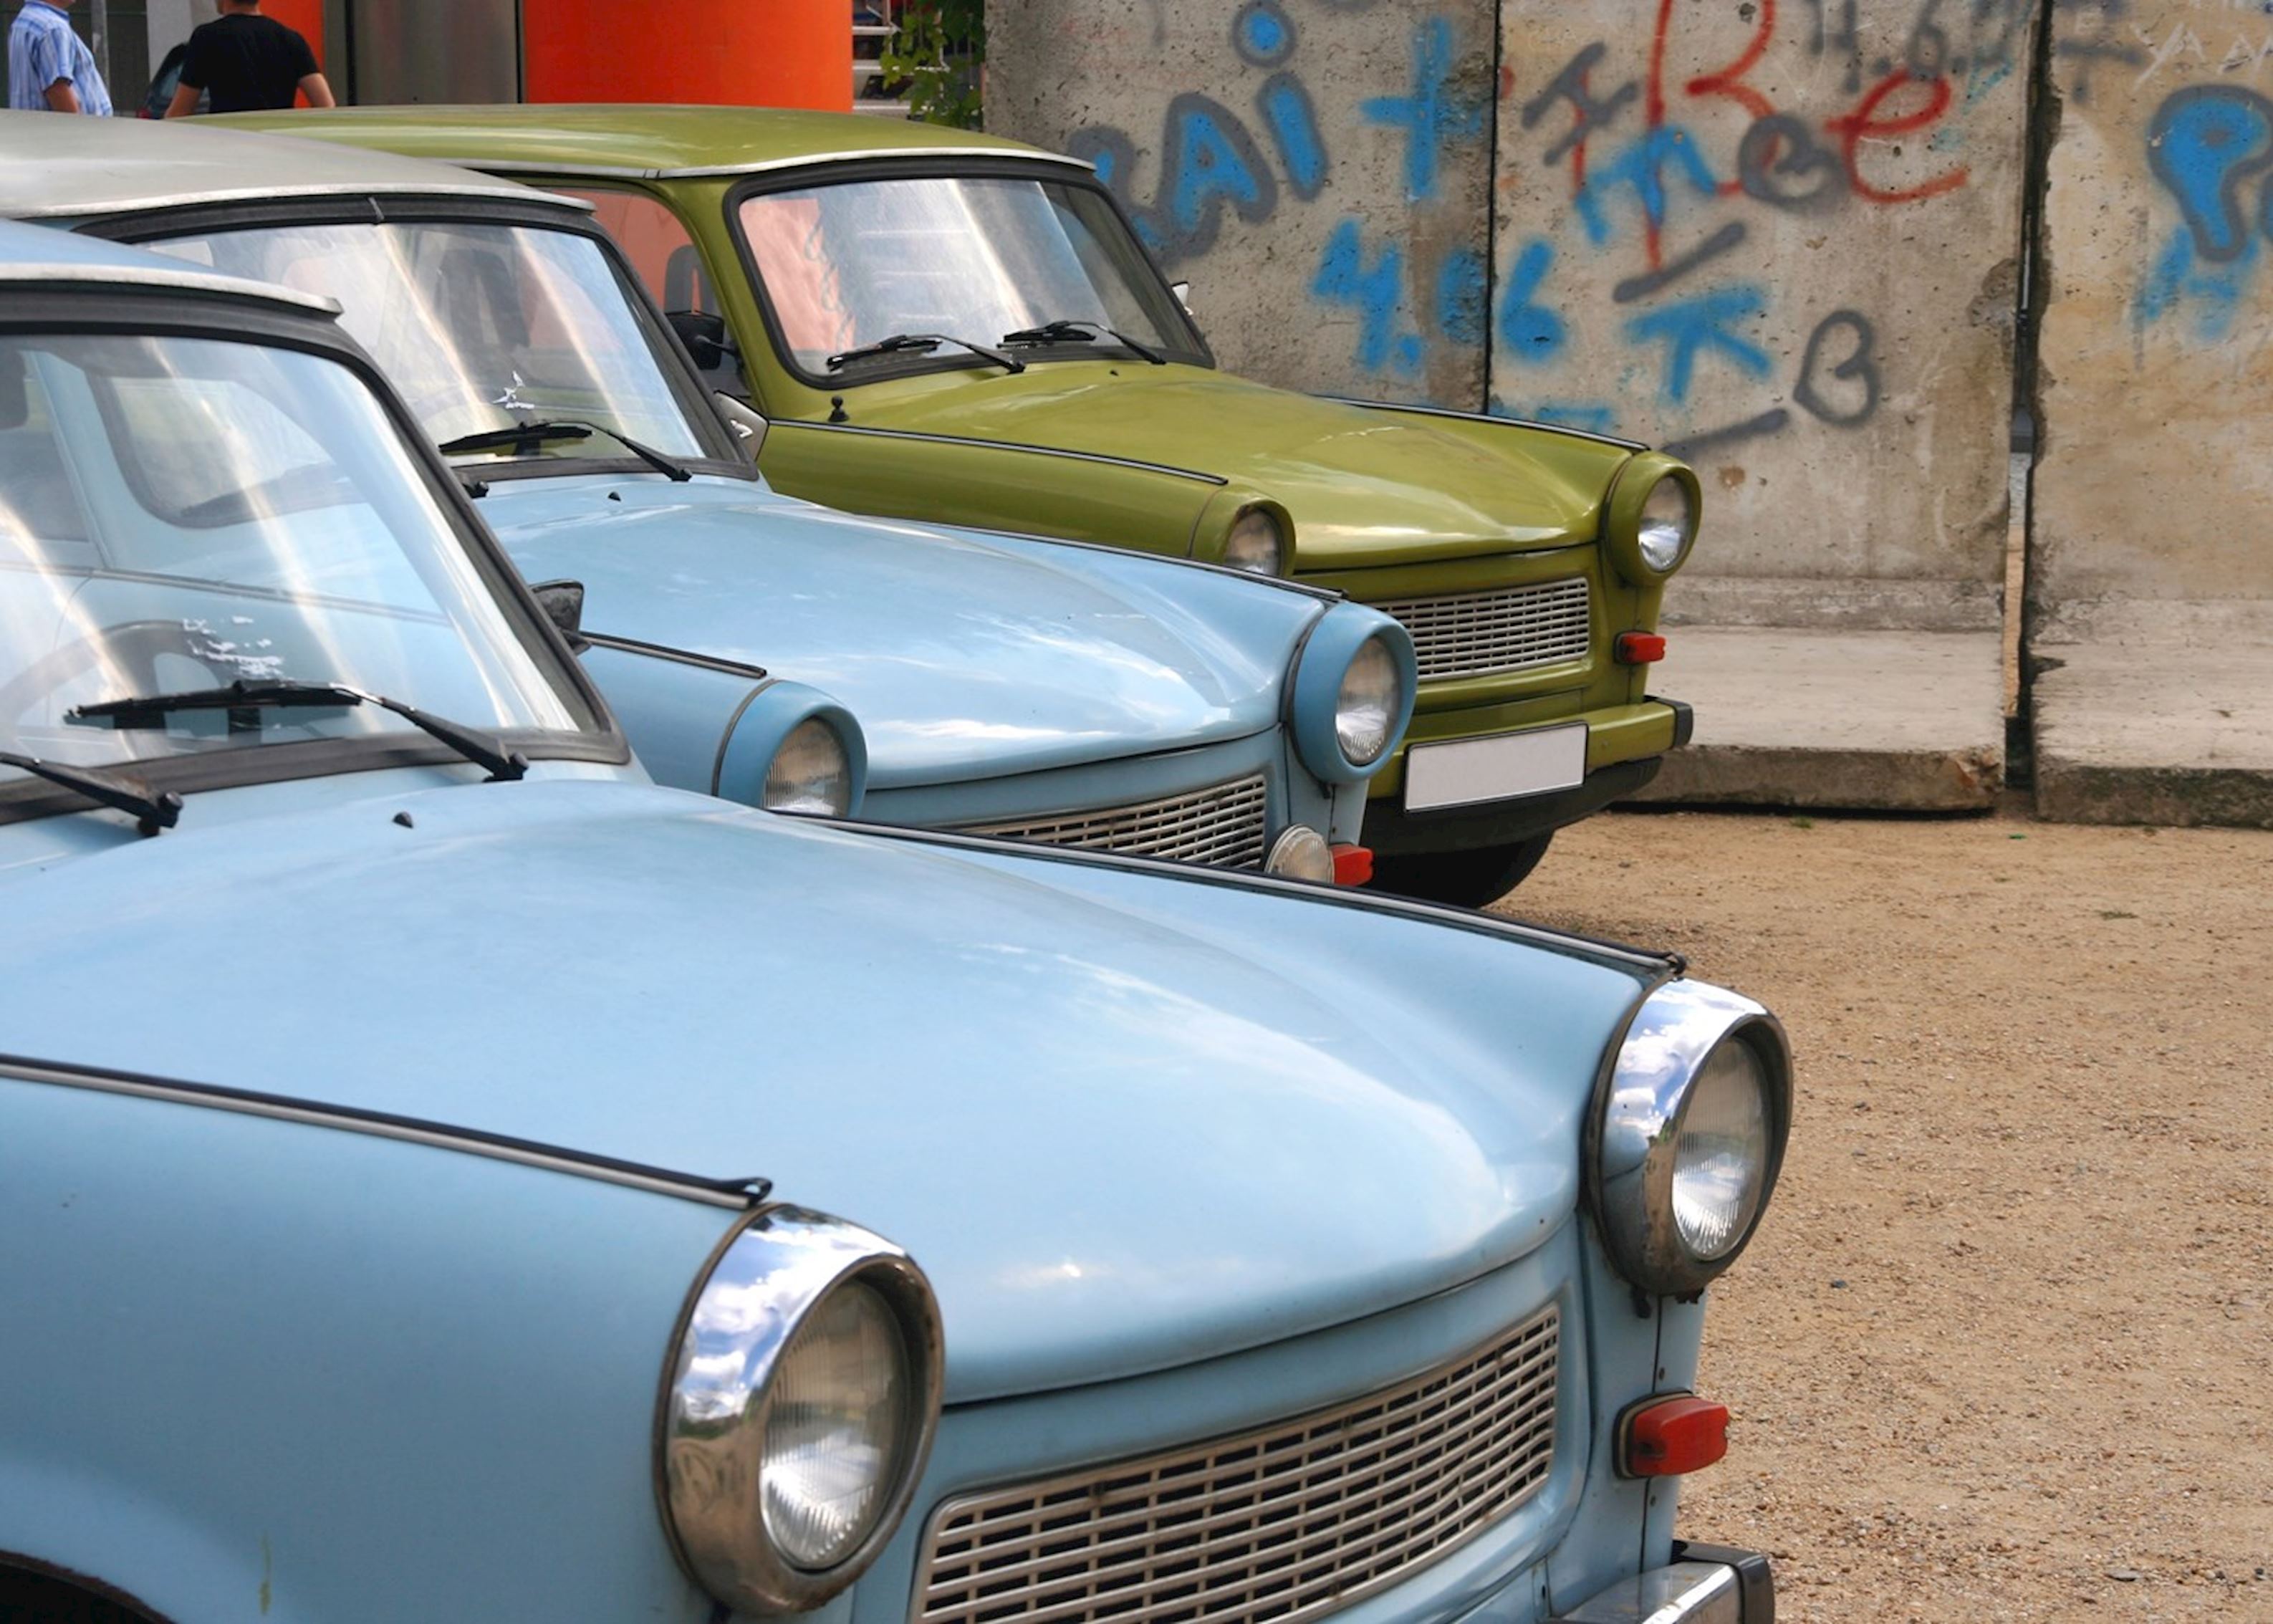 Drive your own Trabant car